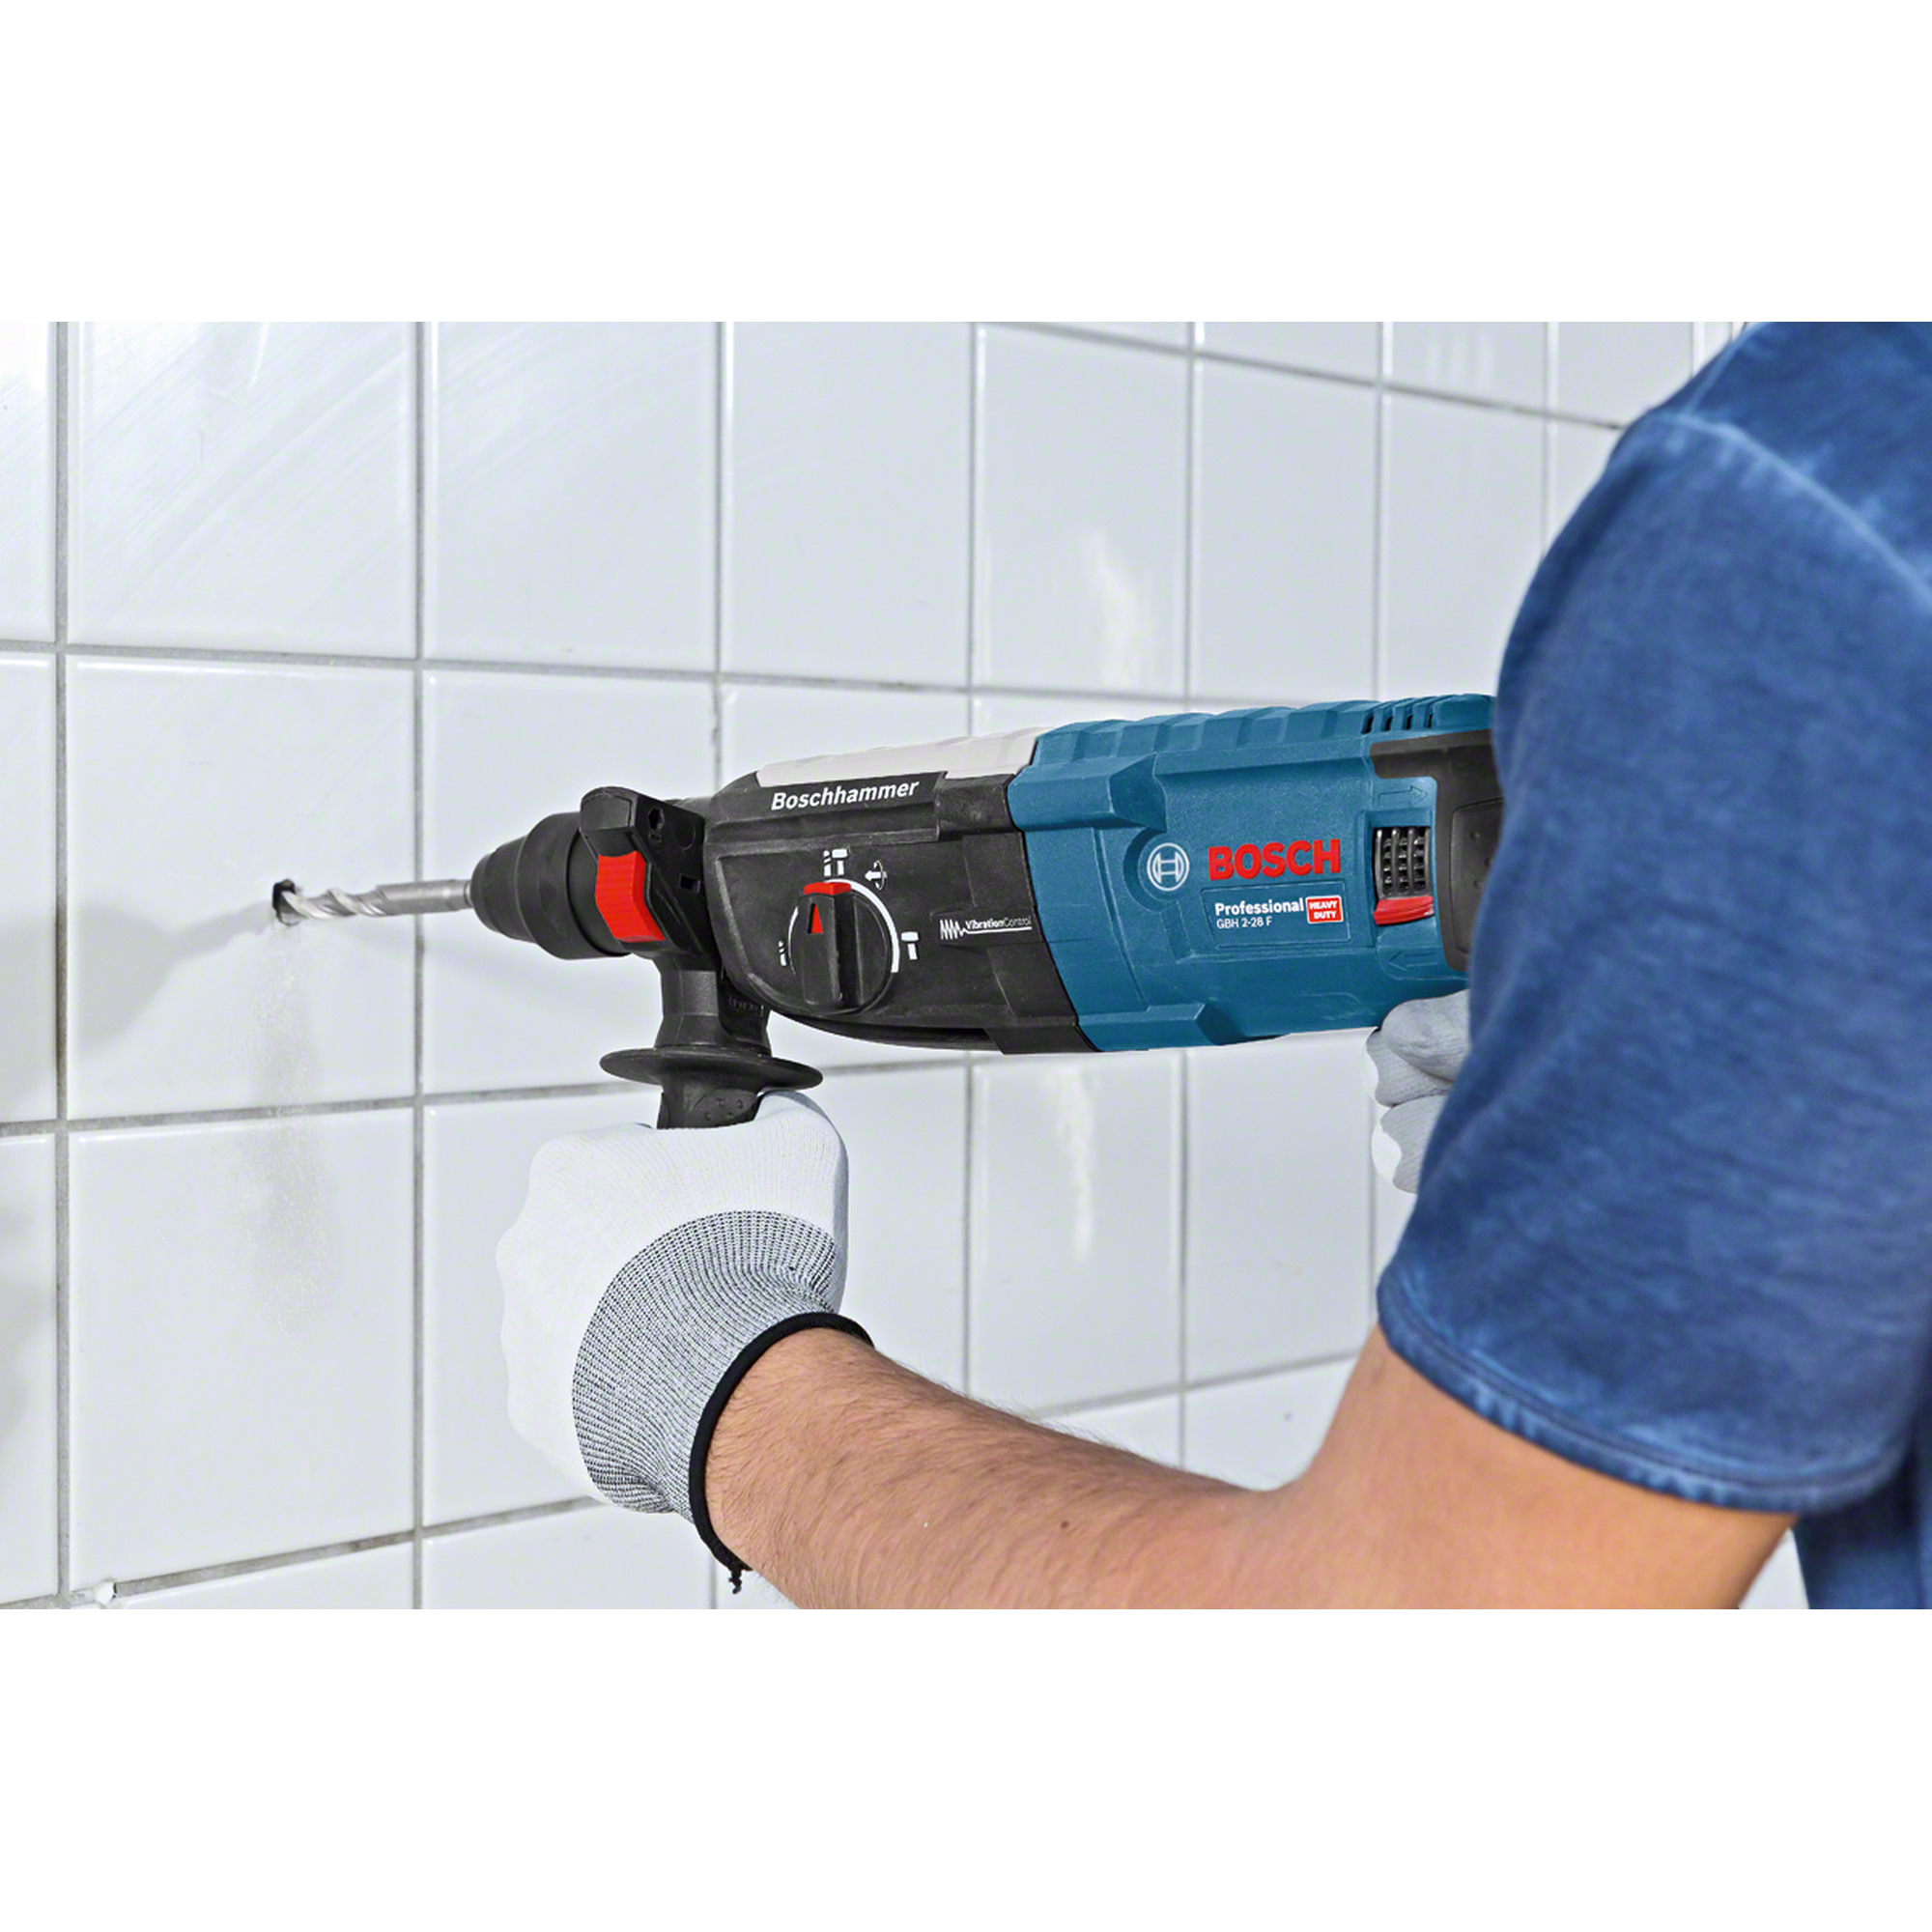 Bohrhammer 'GBH 2-28 F Professional' mit SDS plus, in Koffer + product picture